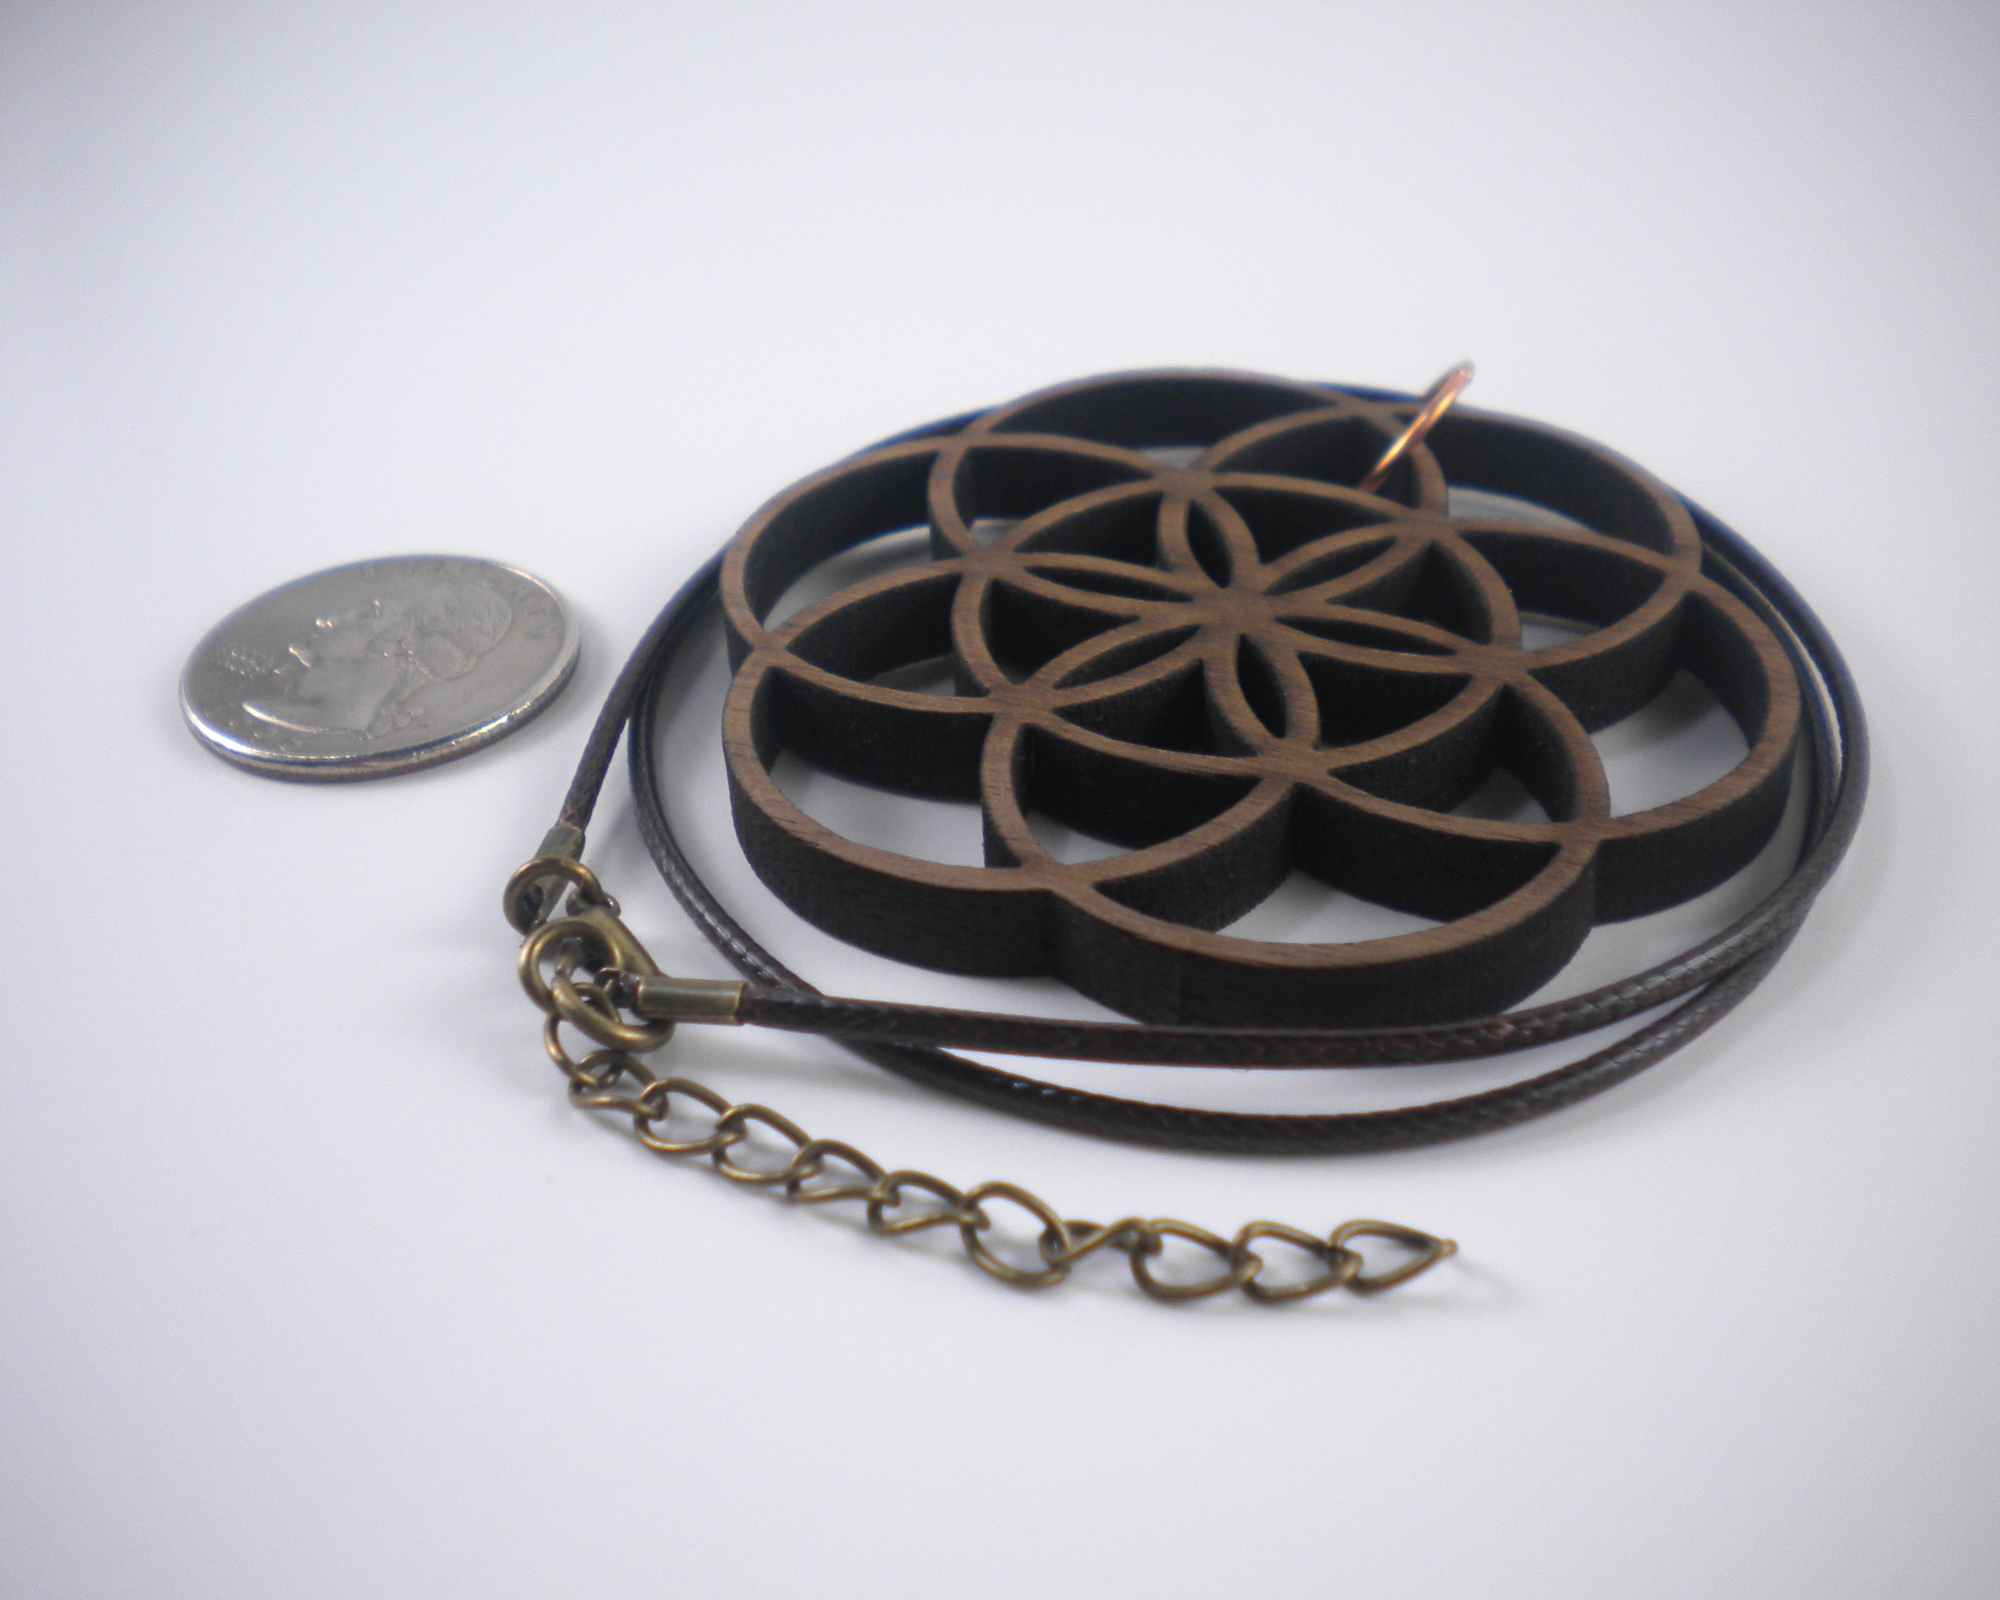 Sacred Geometry Jewelry available. Attractive gifts you will love!